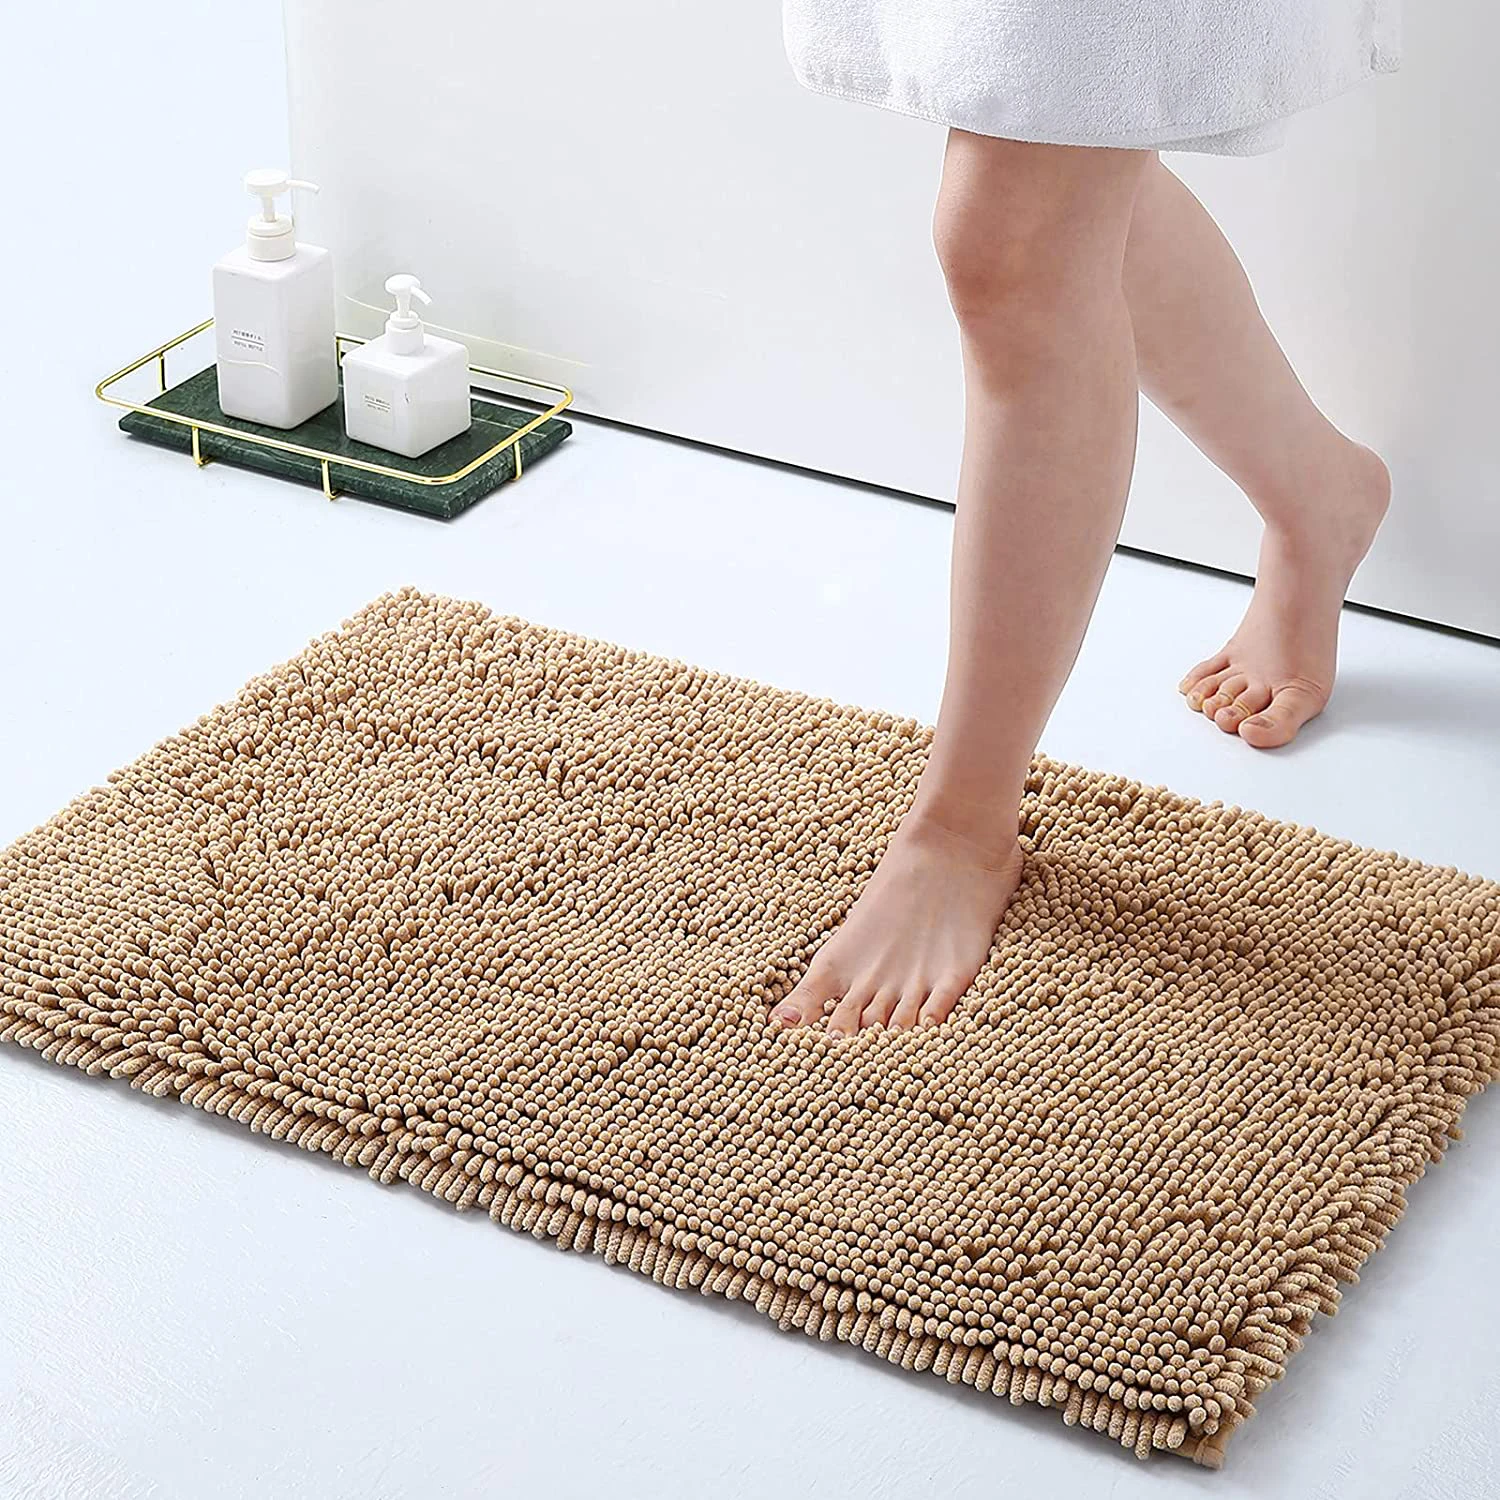 JTdiffer Small Bathroom Rug 15x19 inch Non Slip, Super Absorbent Bathroom  Mat, Extra Soft Bath Mat and Quick Dry Chenille Bath Rugs Carpet for RV